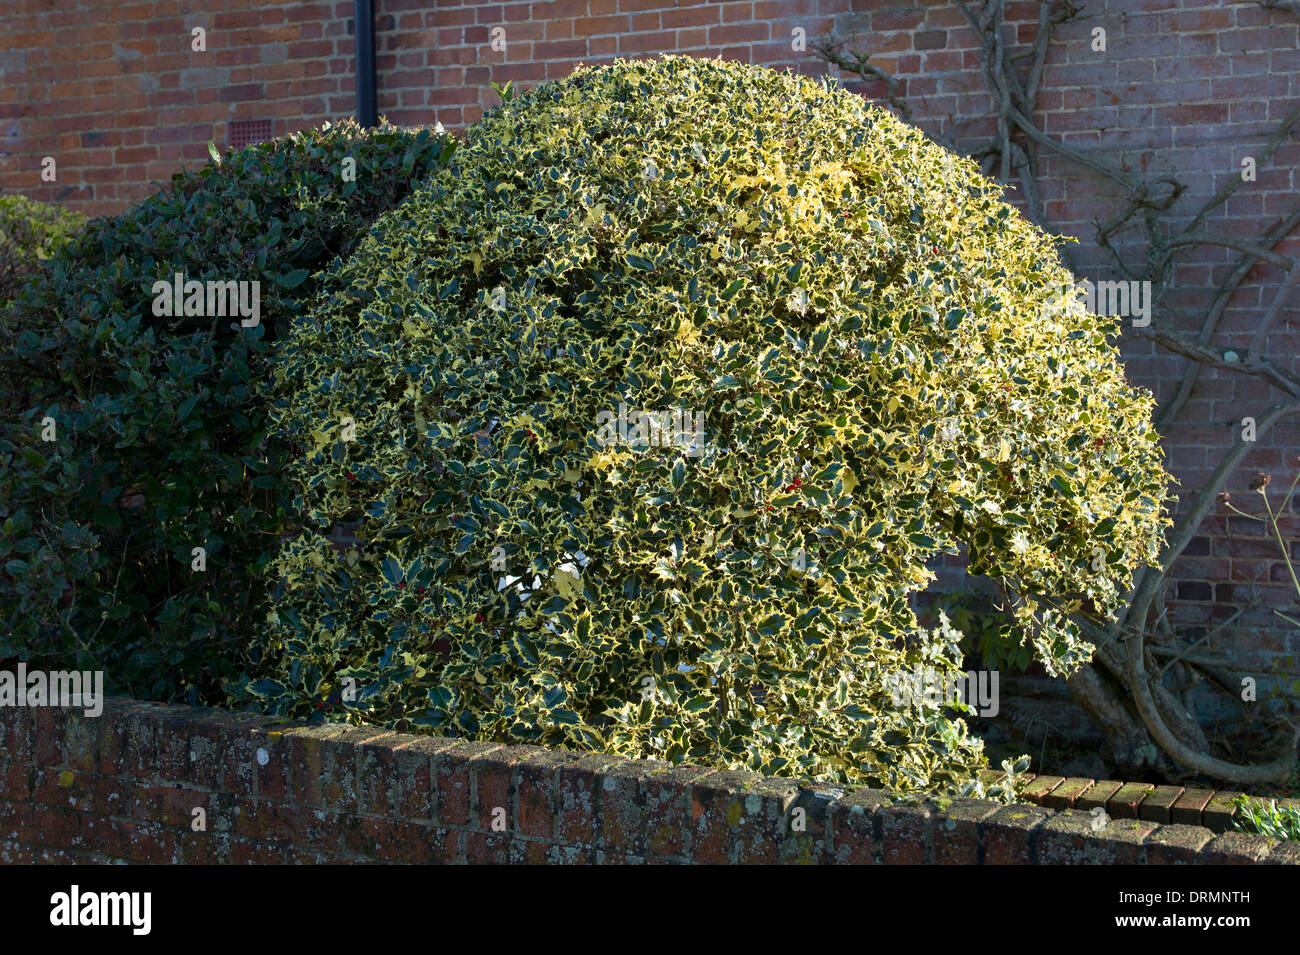 Variegated holly trimmed to spherical shape Stock Photo